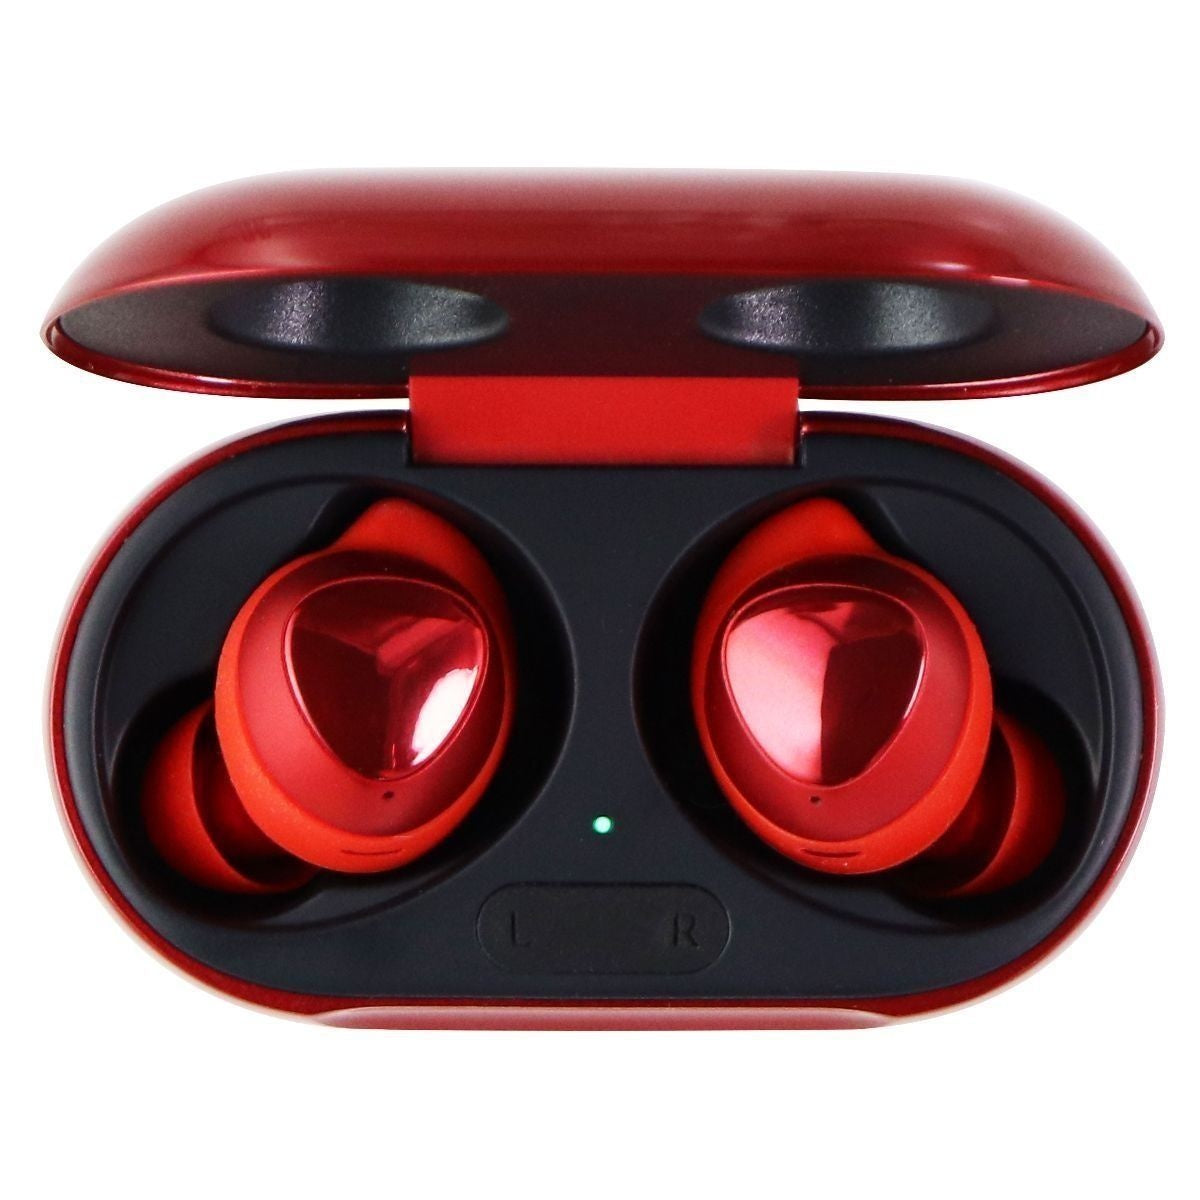 Samsung Galaxy Buds+ Plus, True Wireless Earbuds - Red (SM-R175) Portable Audio - Headphones Samsung    - Simple Cell Bulk Wholesale Pricing - USA Seller